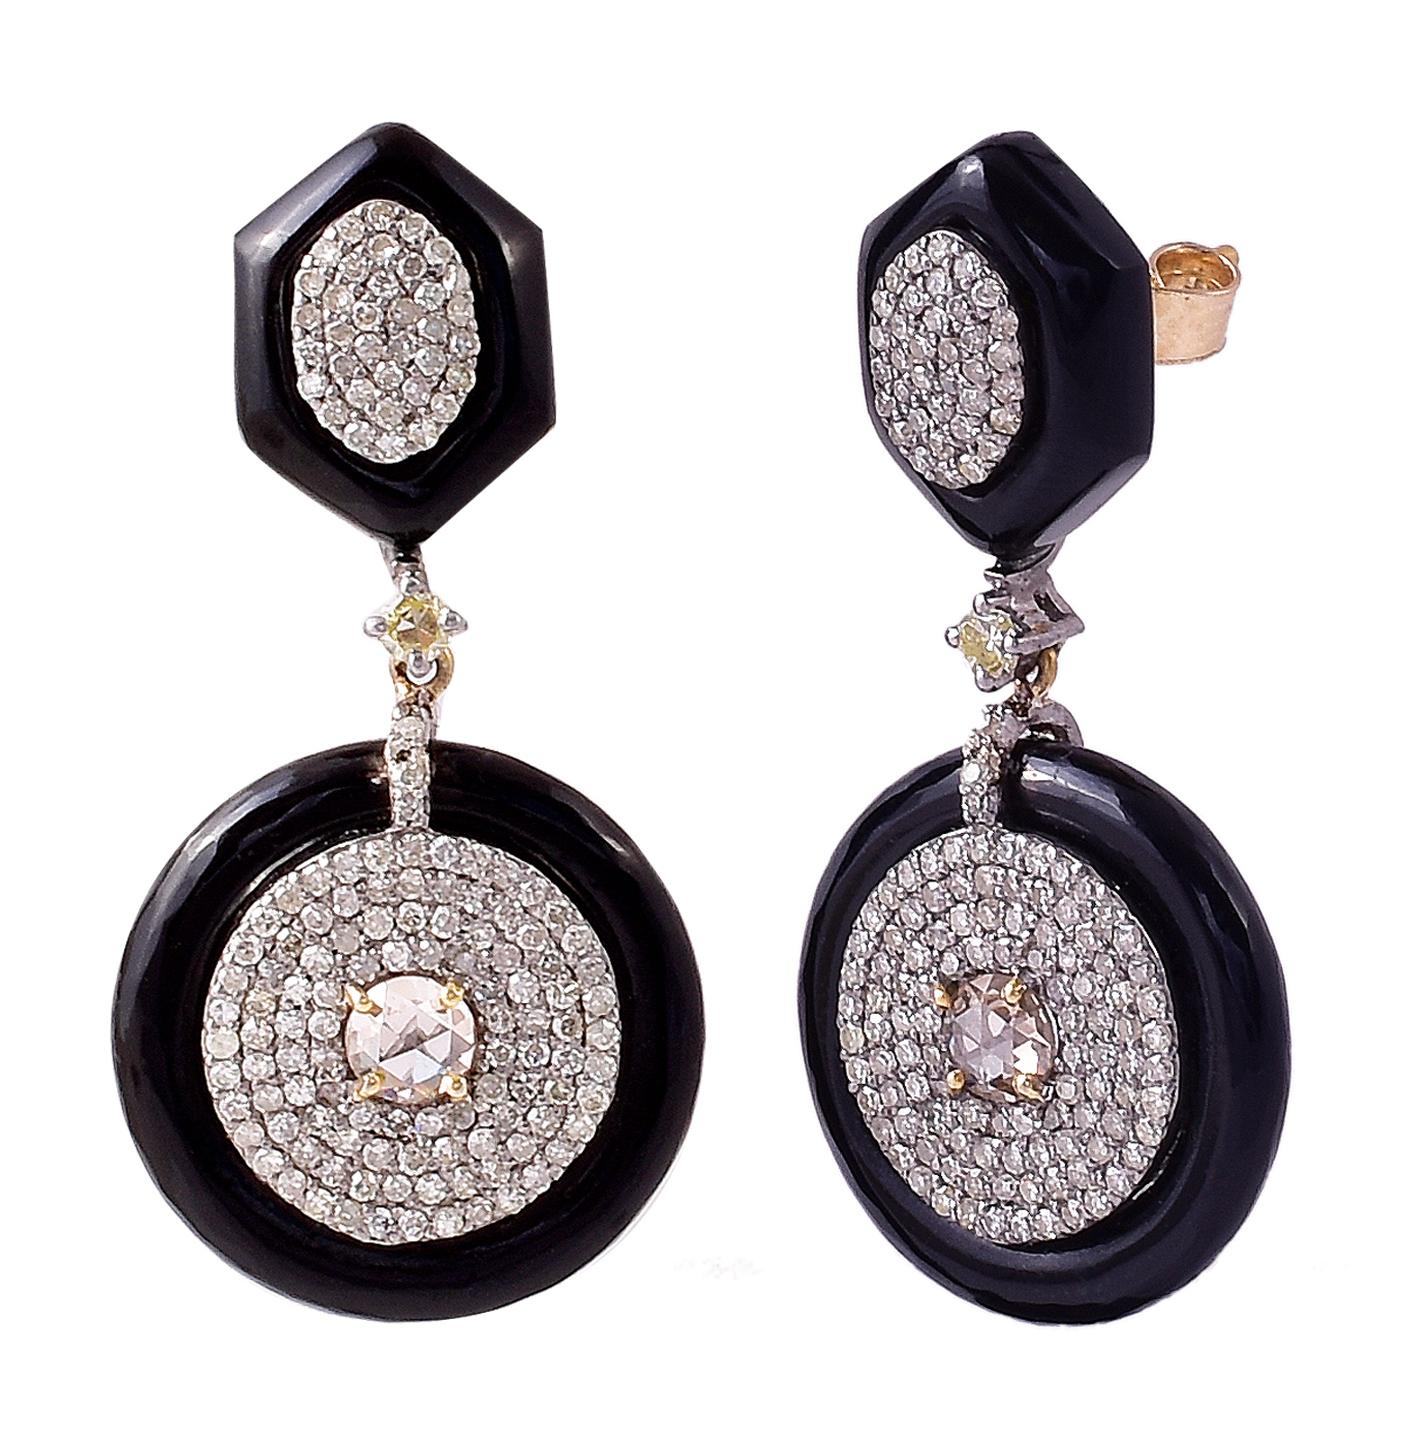 15.26 Carats Diamond, Rose-Cut Diamond, and Black Onyx Drop Earrings in Art-Deco Style

This art-deco style glorious black onyx, solitaire diamond rose-cut, and diamond earring pair is exceptional. The round diamond rose-cut in the center is